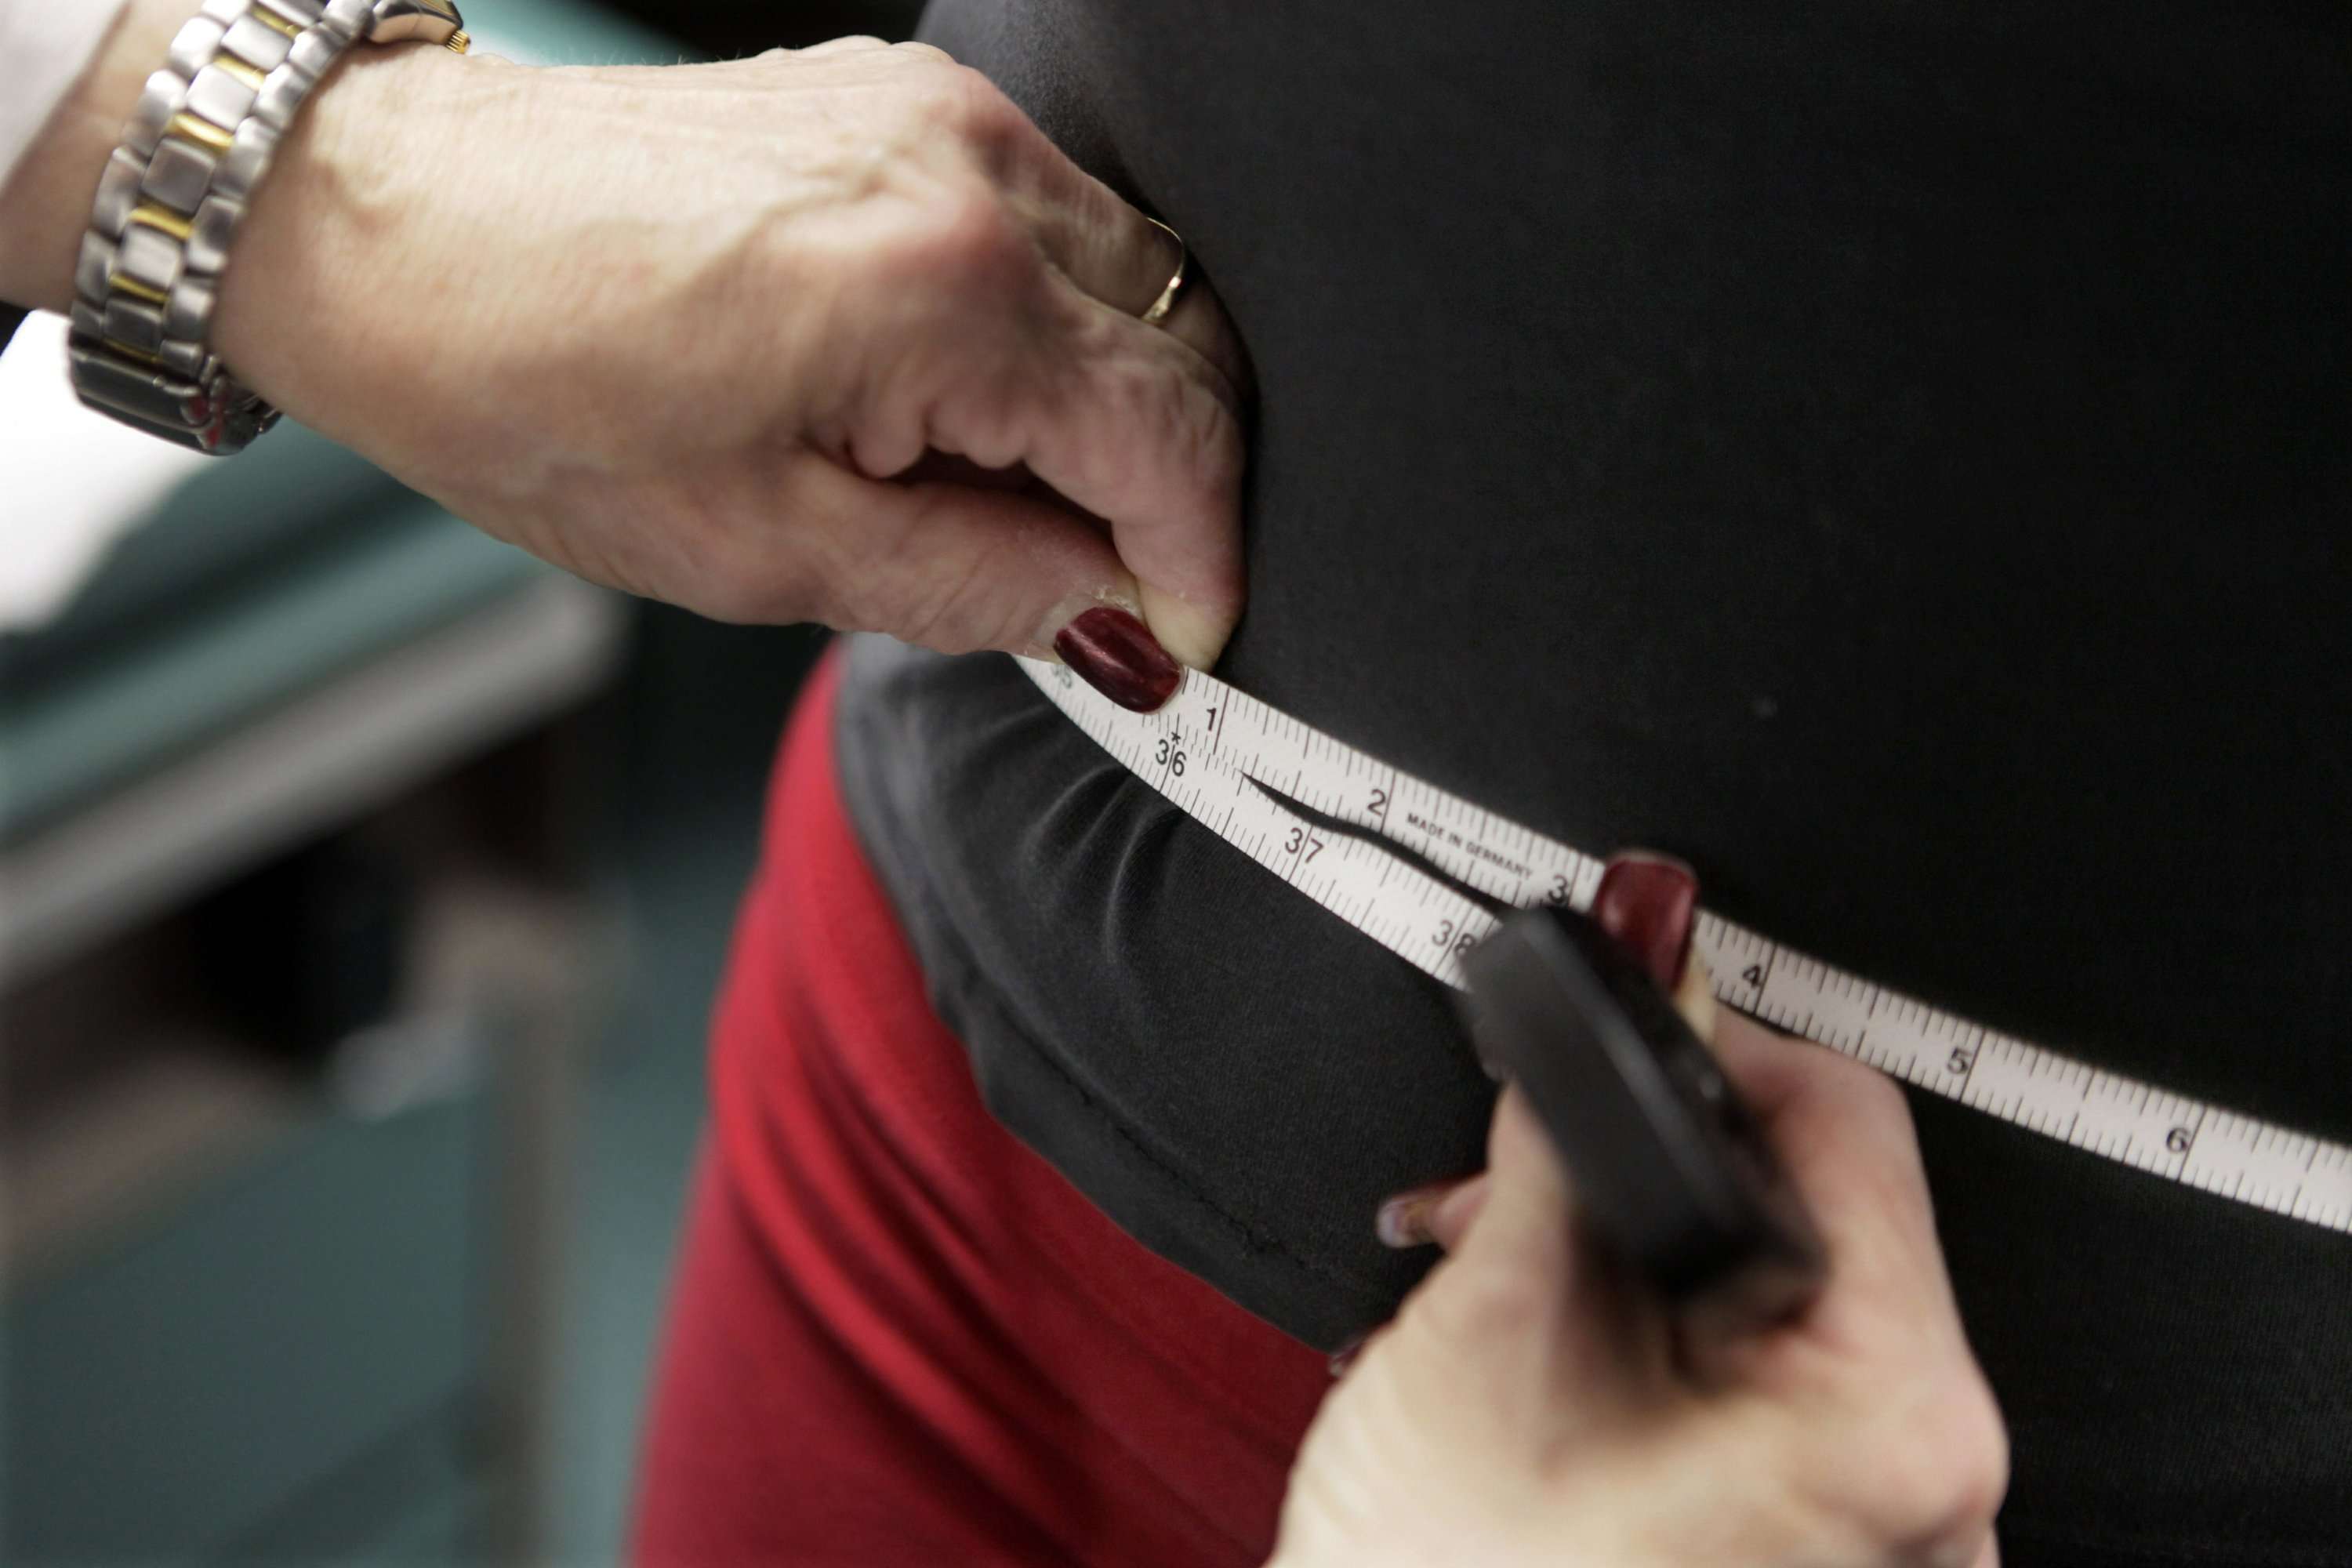 image for About 40% of US adults are obese, government survey finds